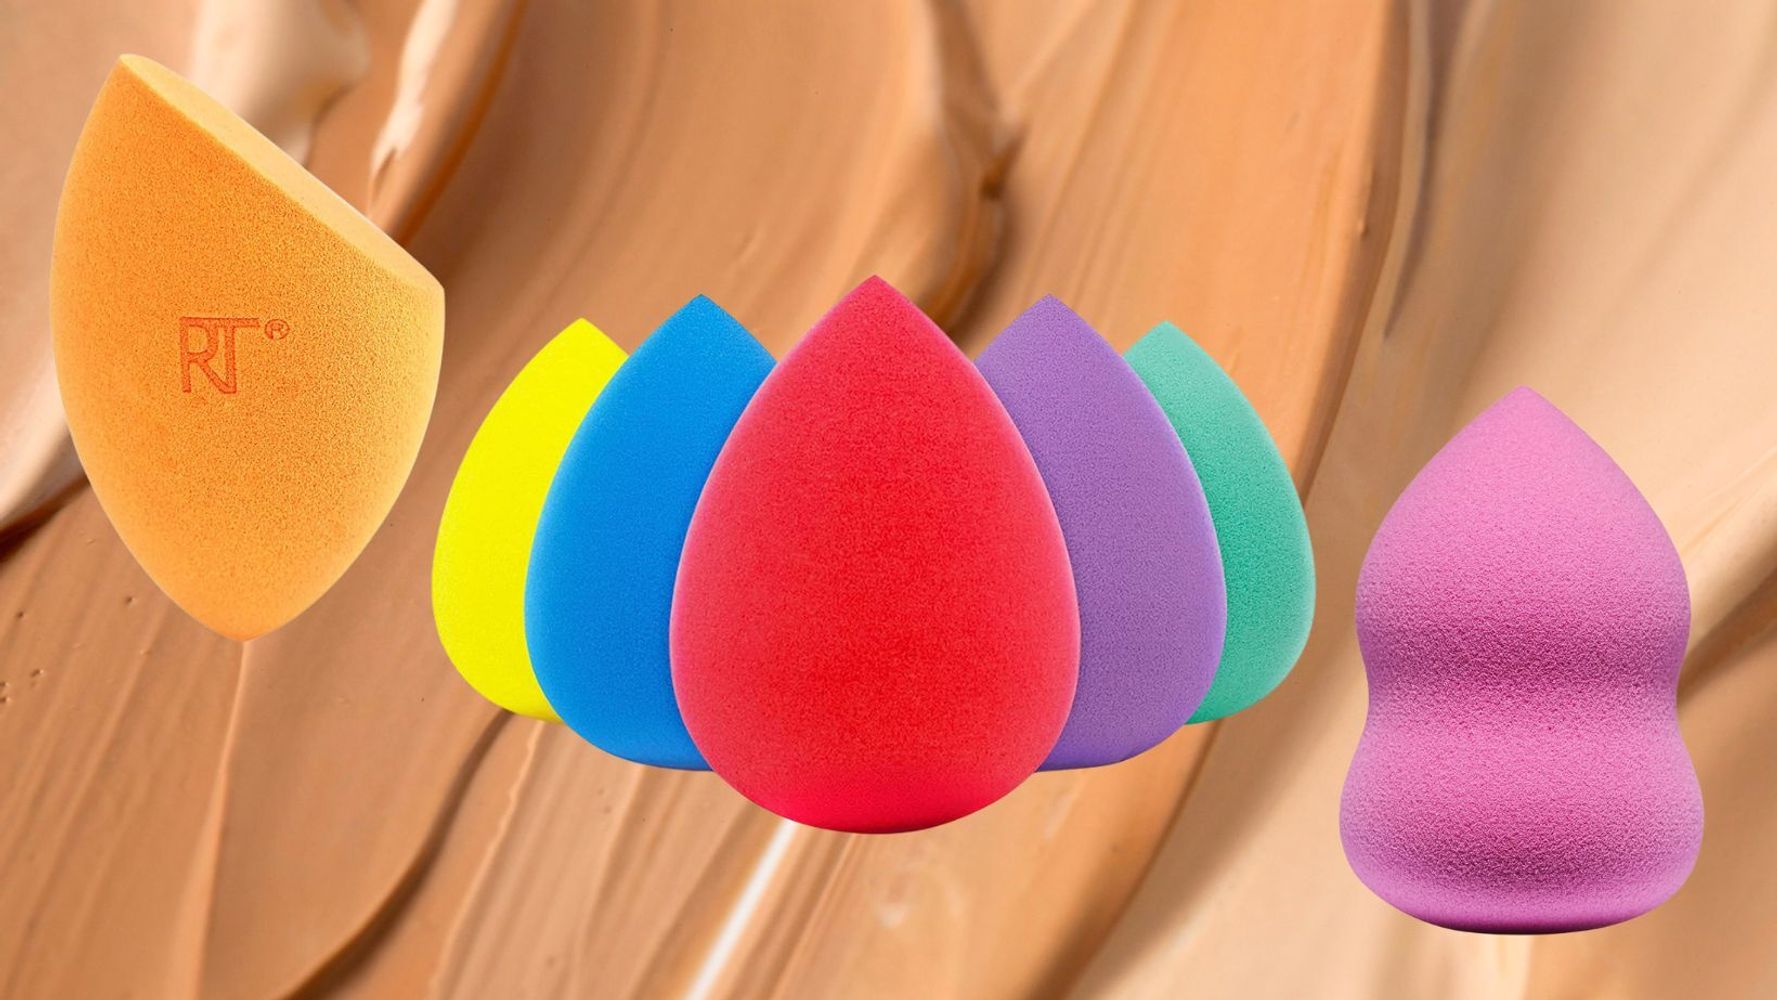 These 9 Sponges Are Beauty Blender Dupes, To Reviews | HuffPost